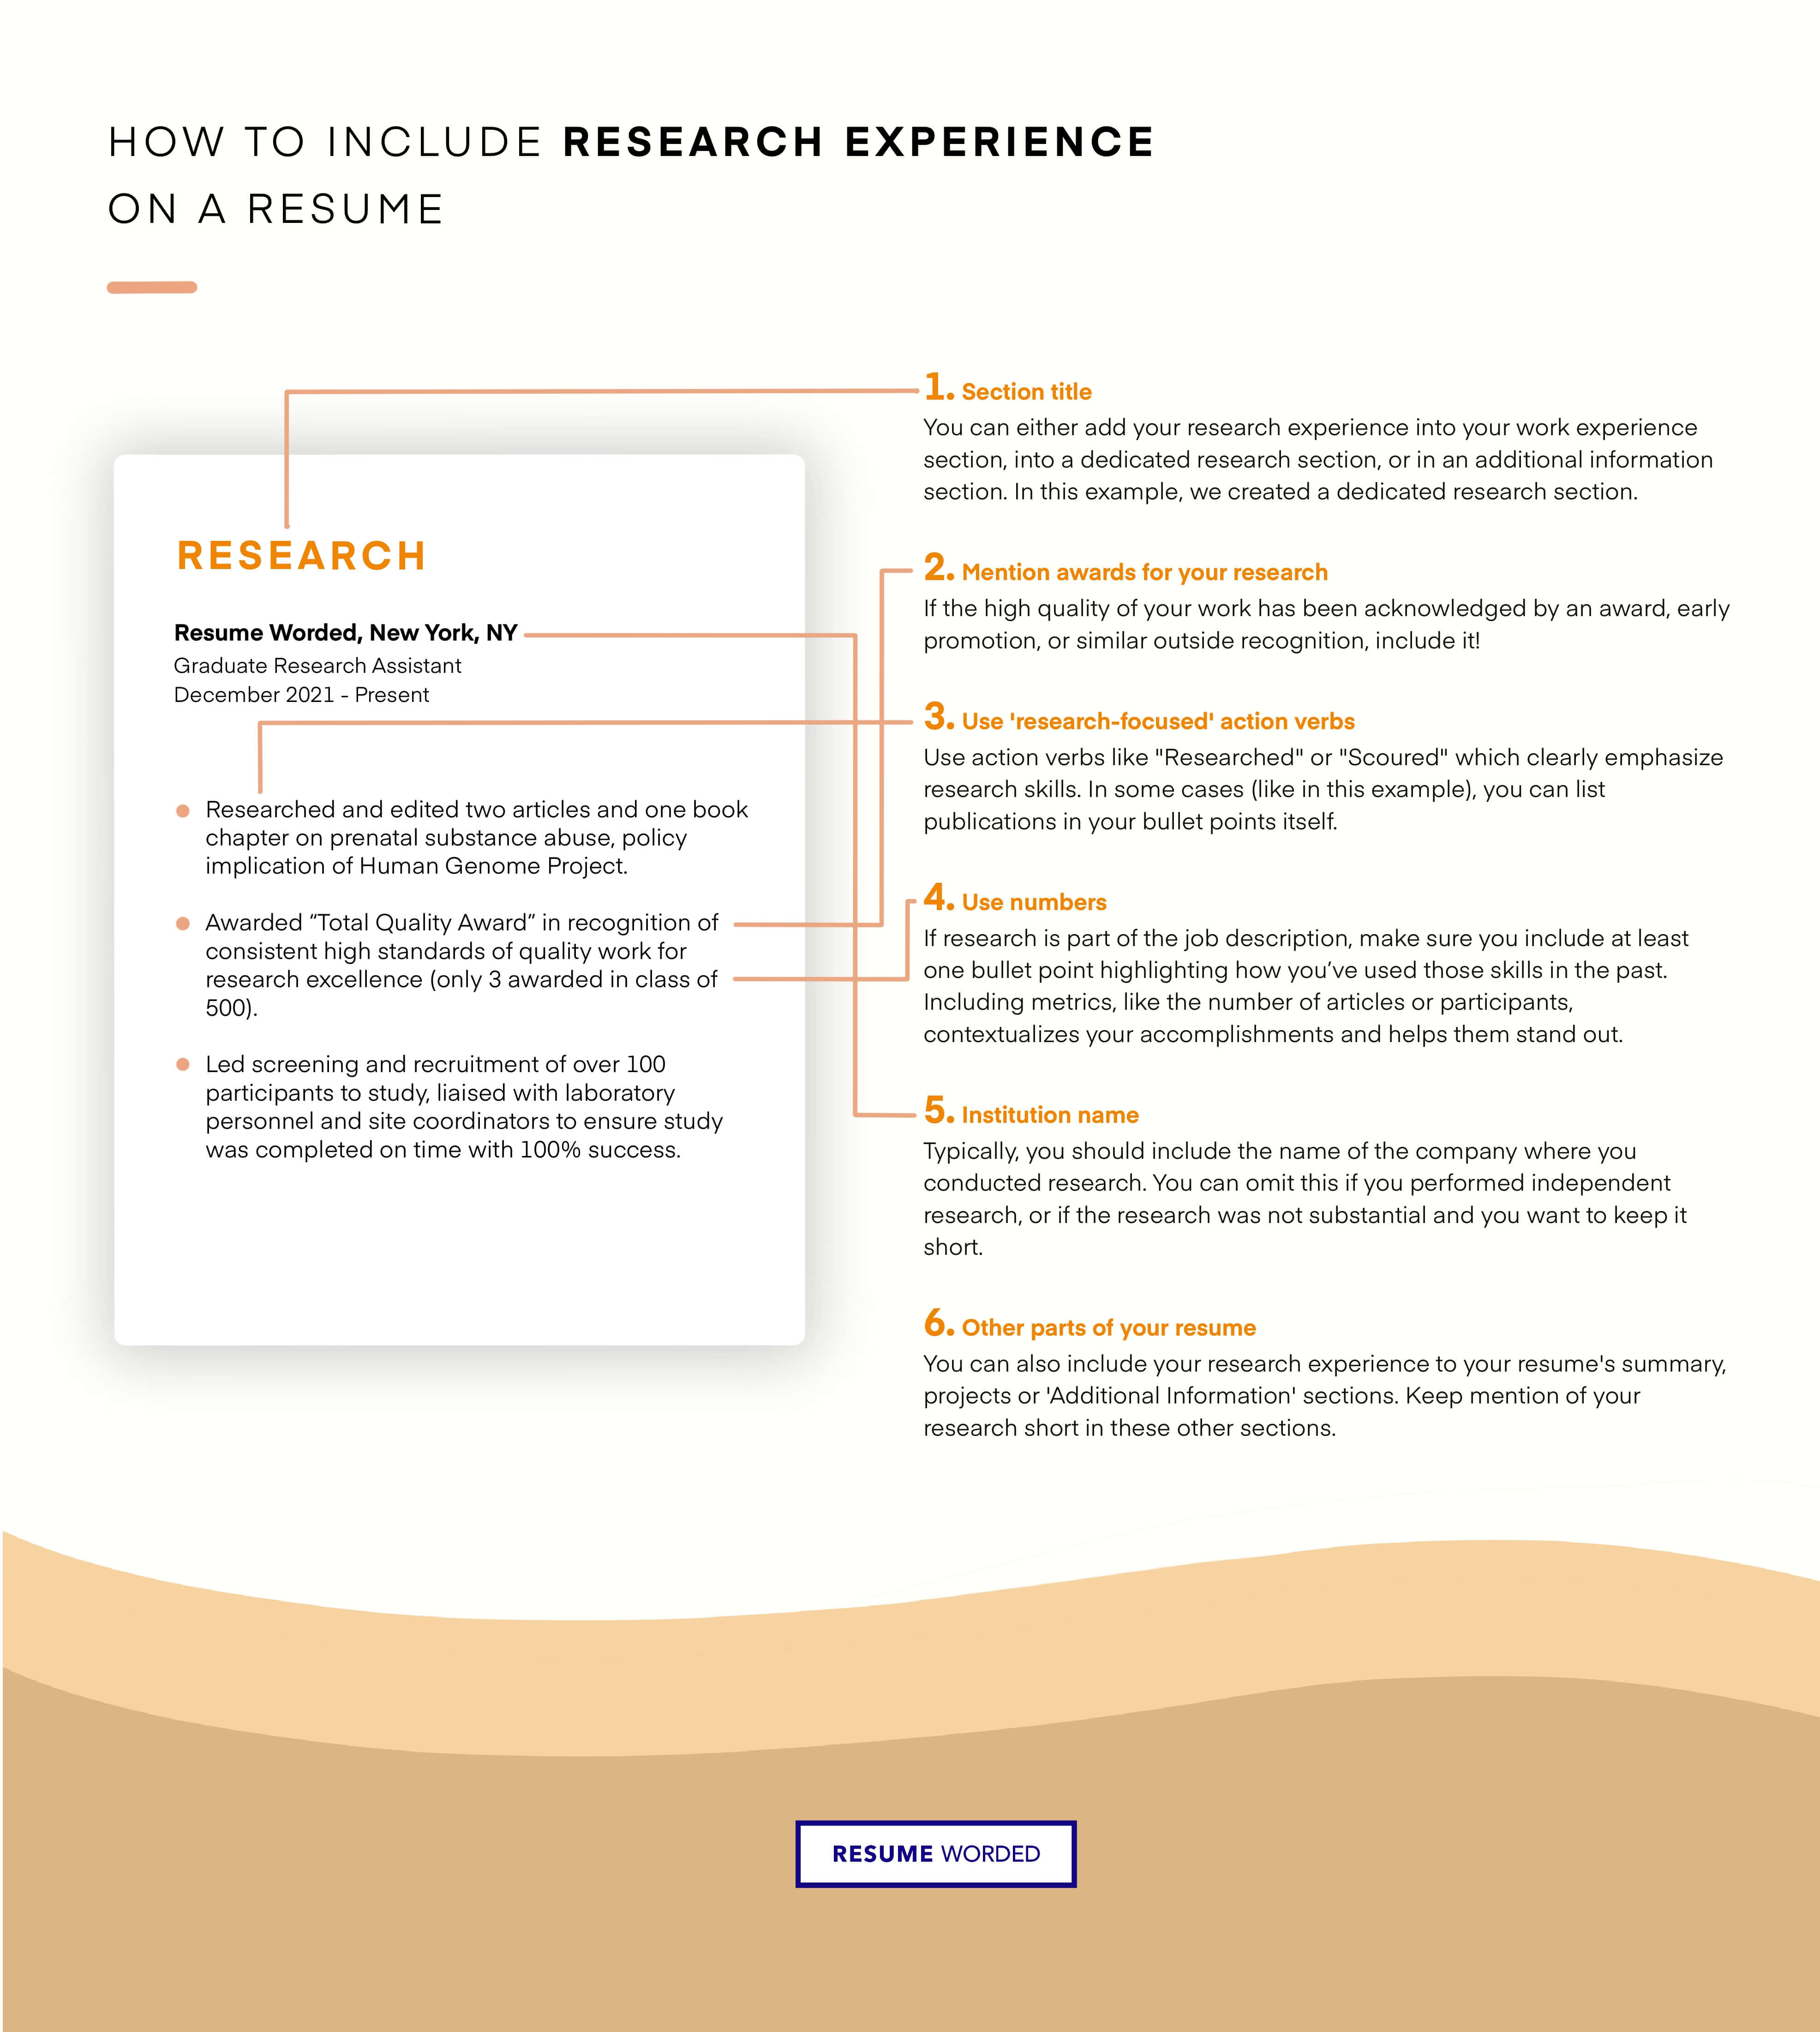 Highlight your published research. - Clinical Psychologist Resume